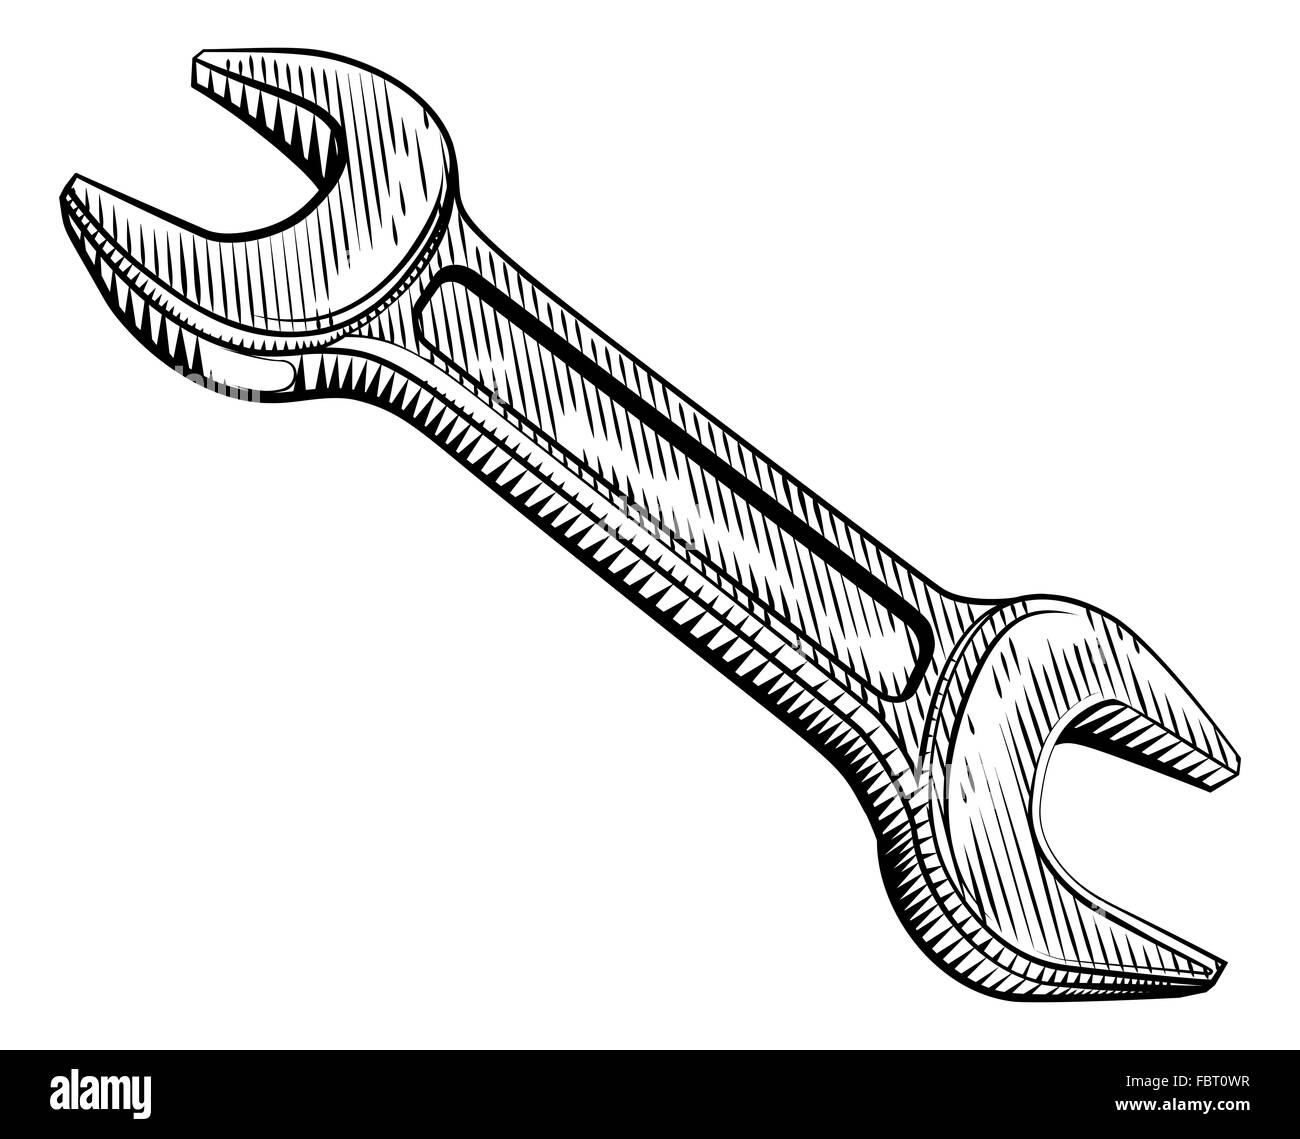 A mechanic or plumbers spanner drawn in a vintage retro woodblock woodcut style Stock Photo